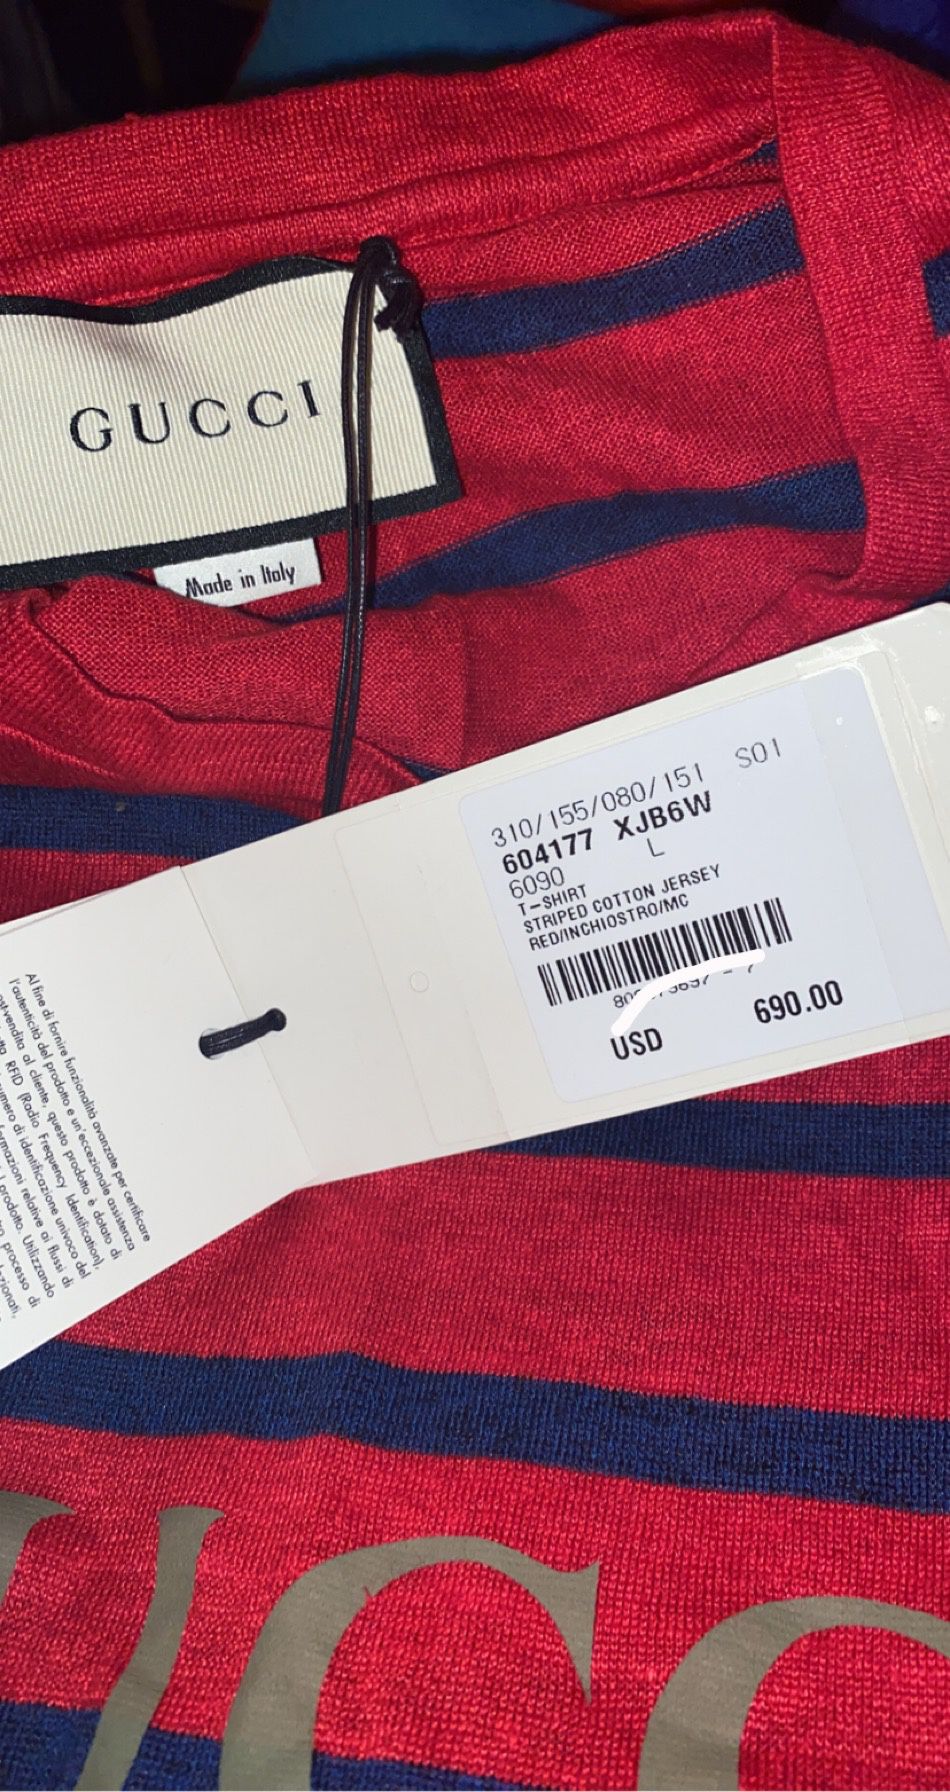 Authentic Gucci shirt